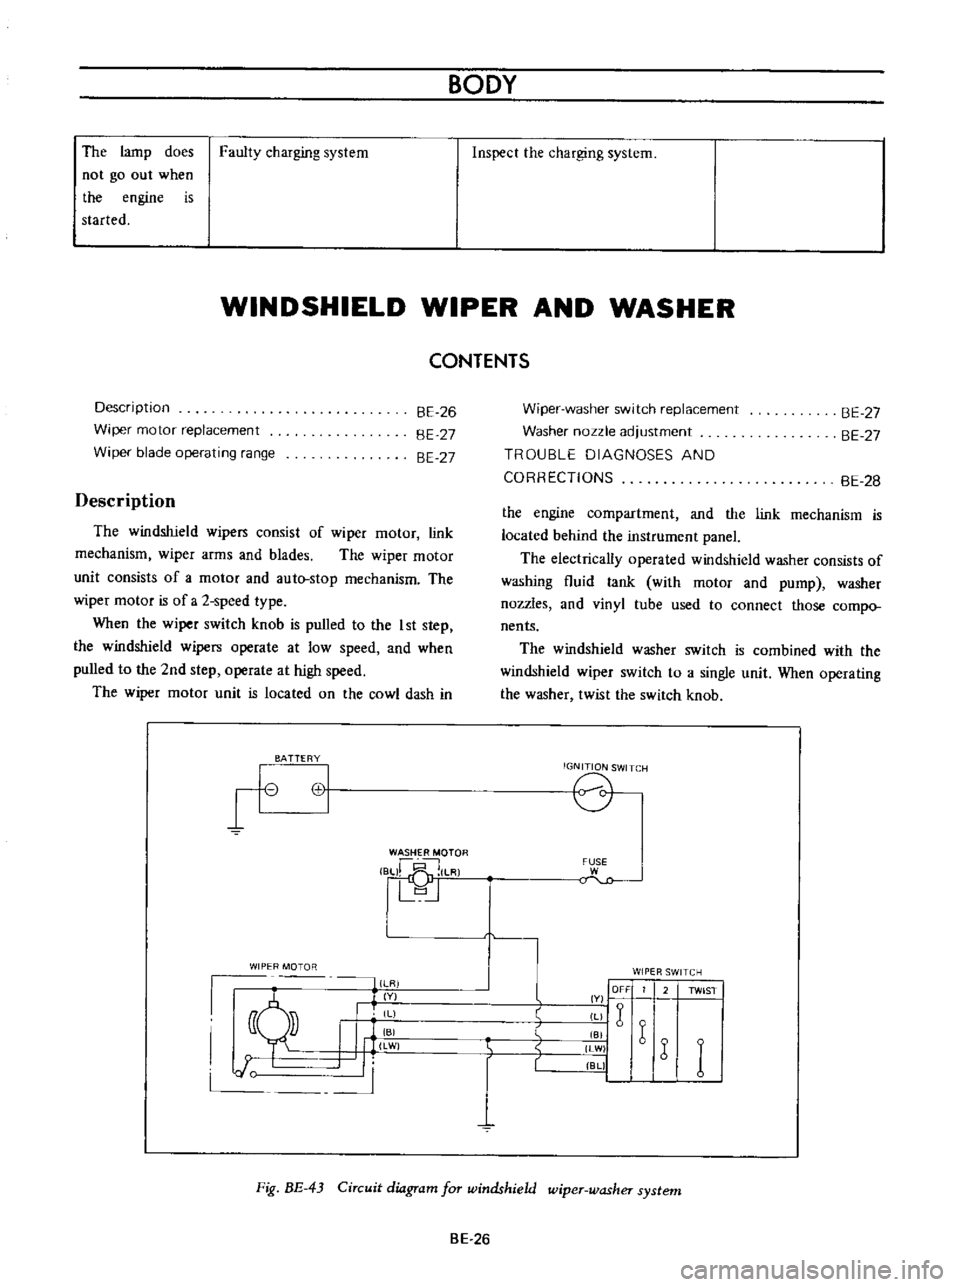 DATSUN B110 1973  Service Repair Manual 
The

lamp 
does

not

go 
out 
when

the

engine 
is

started 
Faulty 
charging 
system 
BODY

Inspect 
the

charging

system

WINDSHIELD 
WIPER 
AND

WASHER

Description

Wiper 
motor

replacement

